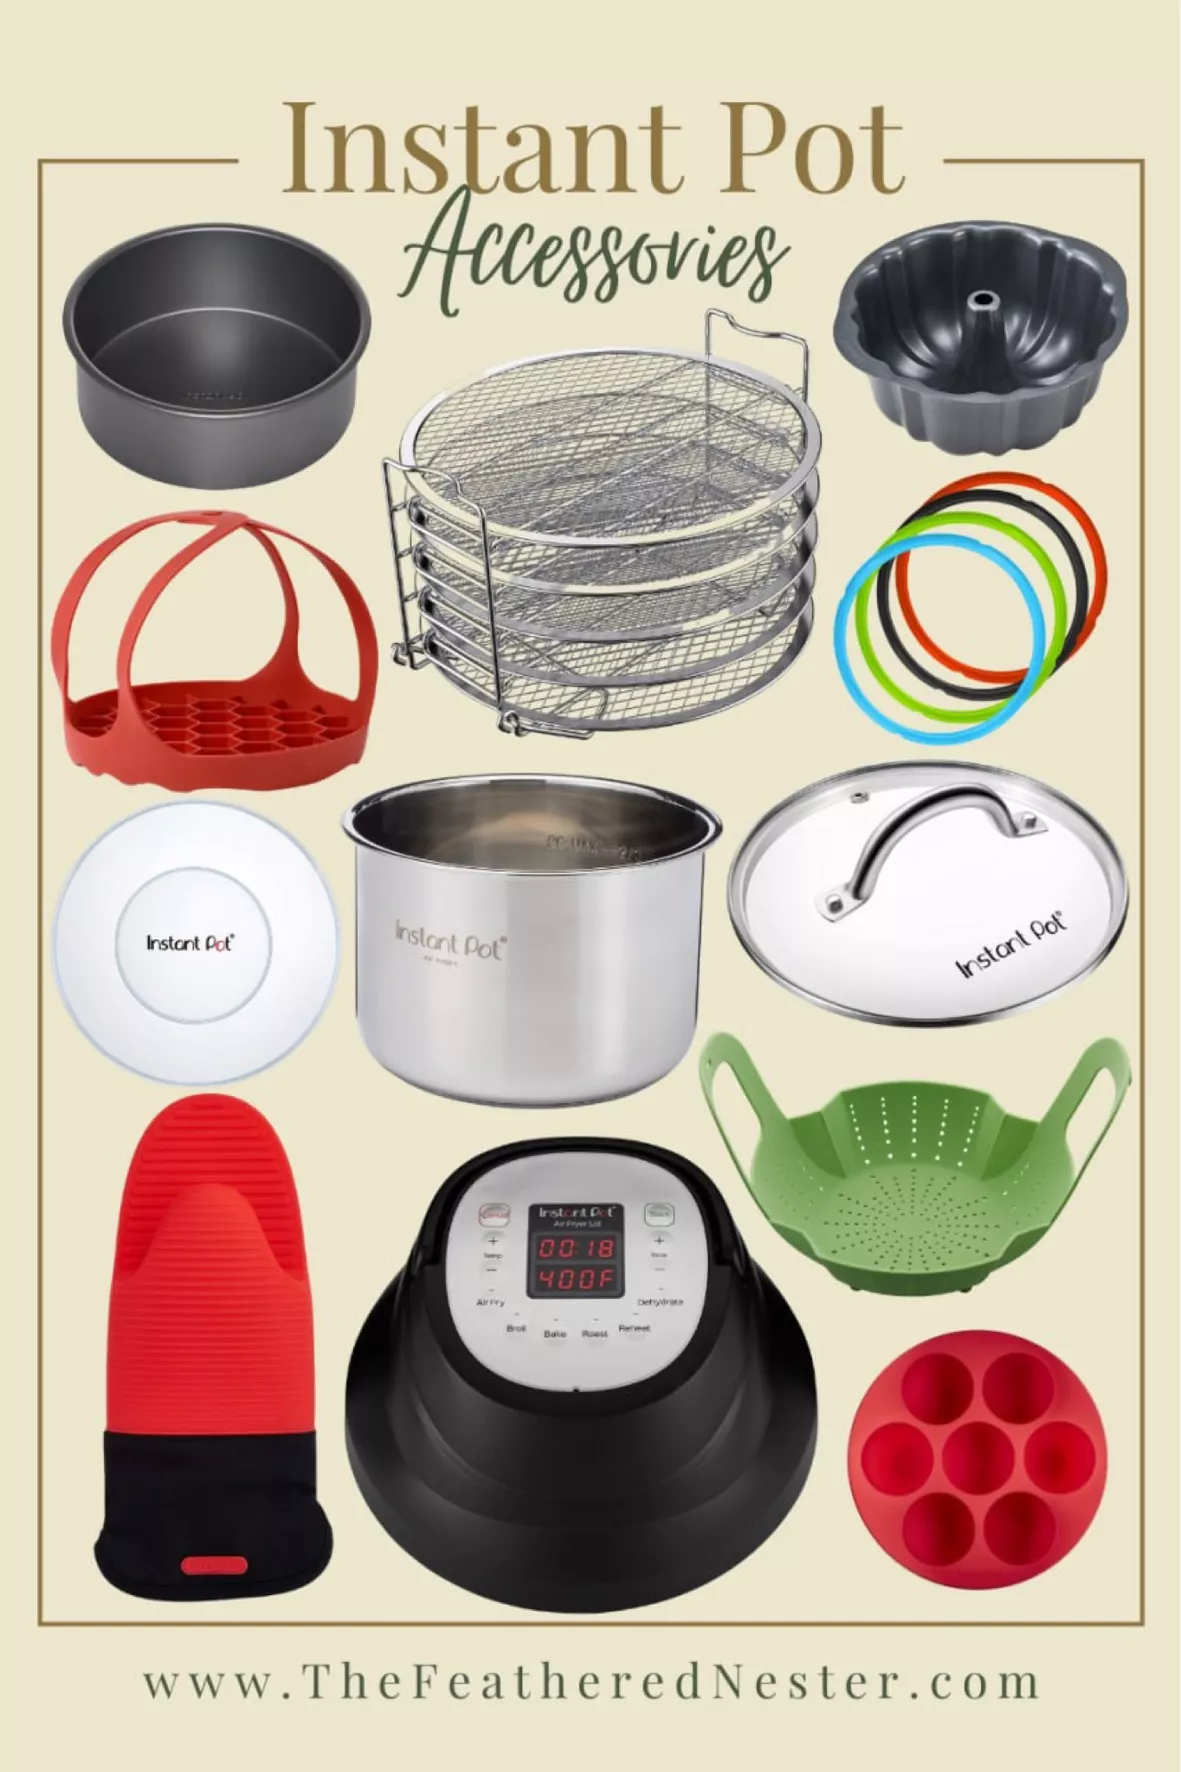  Cooking Accessories Set Compatible with Instant Pot Accessories  8 Qt Only, 8 Quart Accessory Kit with 2 Baskets Glass Lid Silicone Sealing  Rings Springform Pan Cookbook: Home & Kitchen